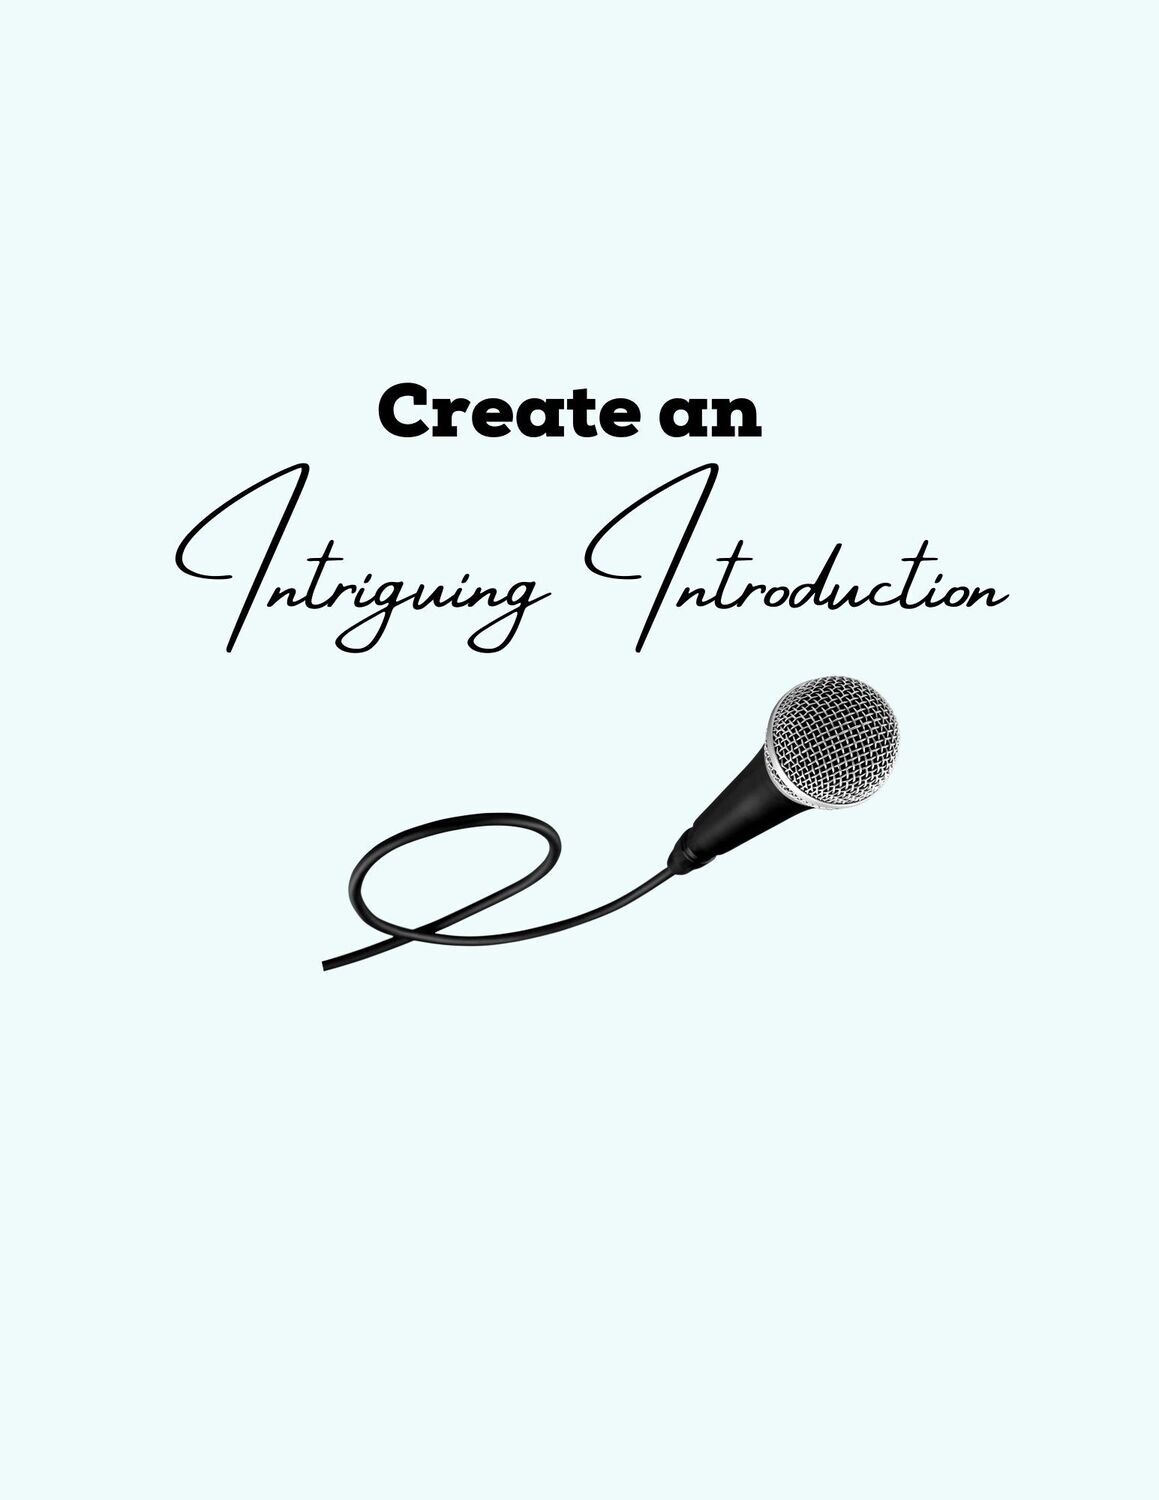 3 Steps to Creating an Intriguing Introduction